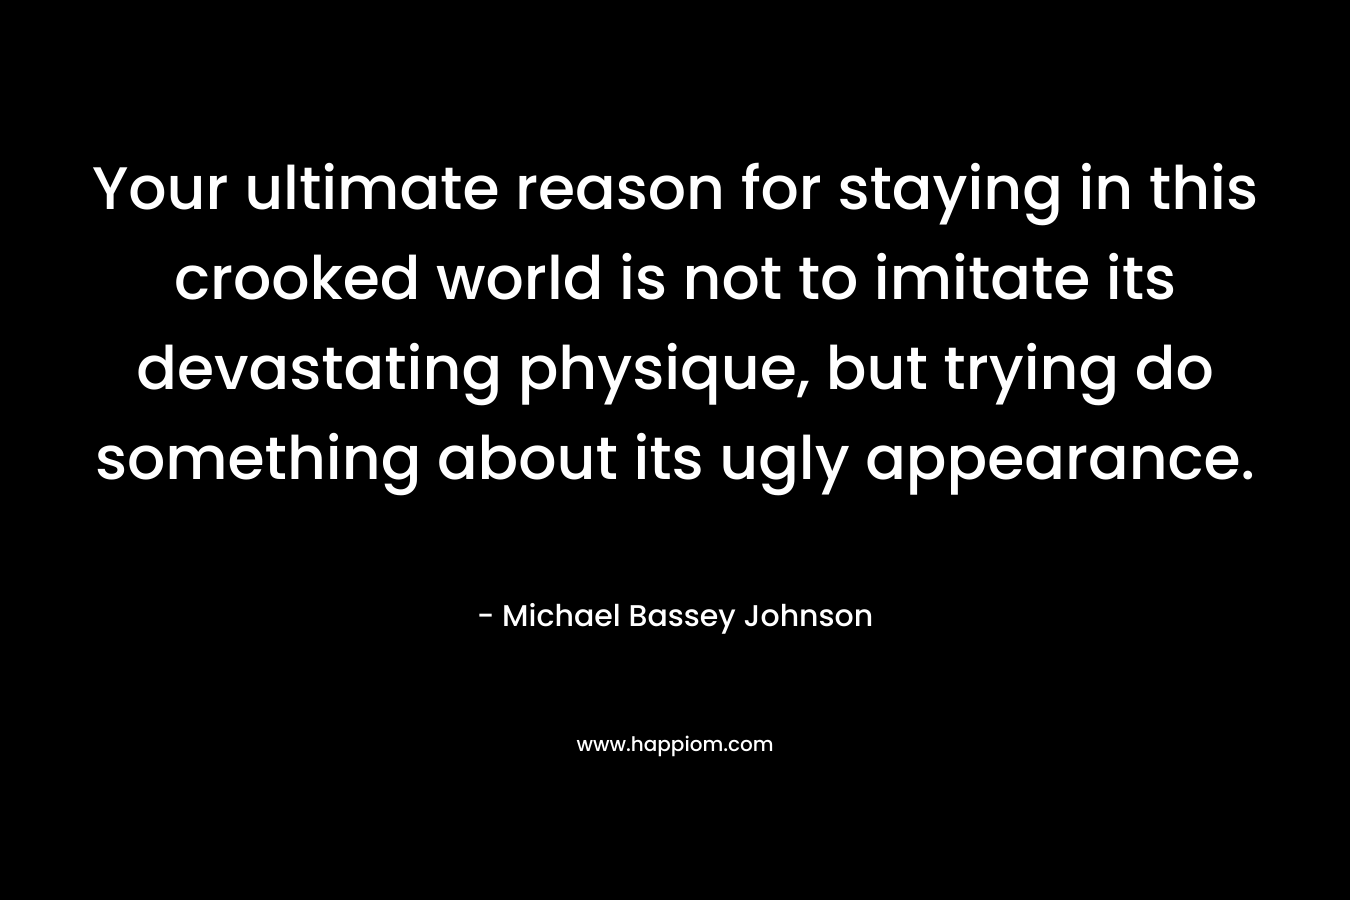 Your ultimate reason for staying in this crooked world is not to imitate its devastating physique, but trying do something about its ugly appearance.